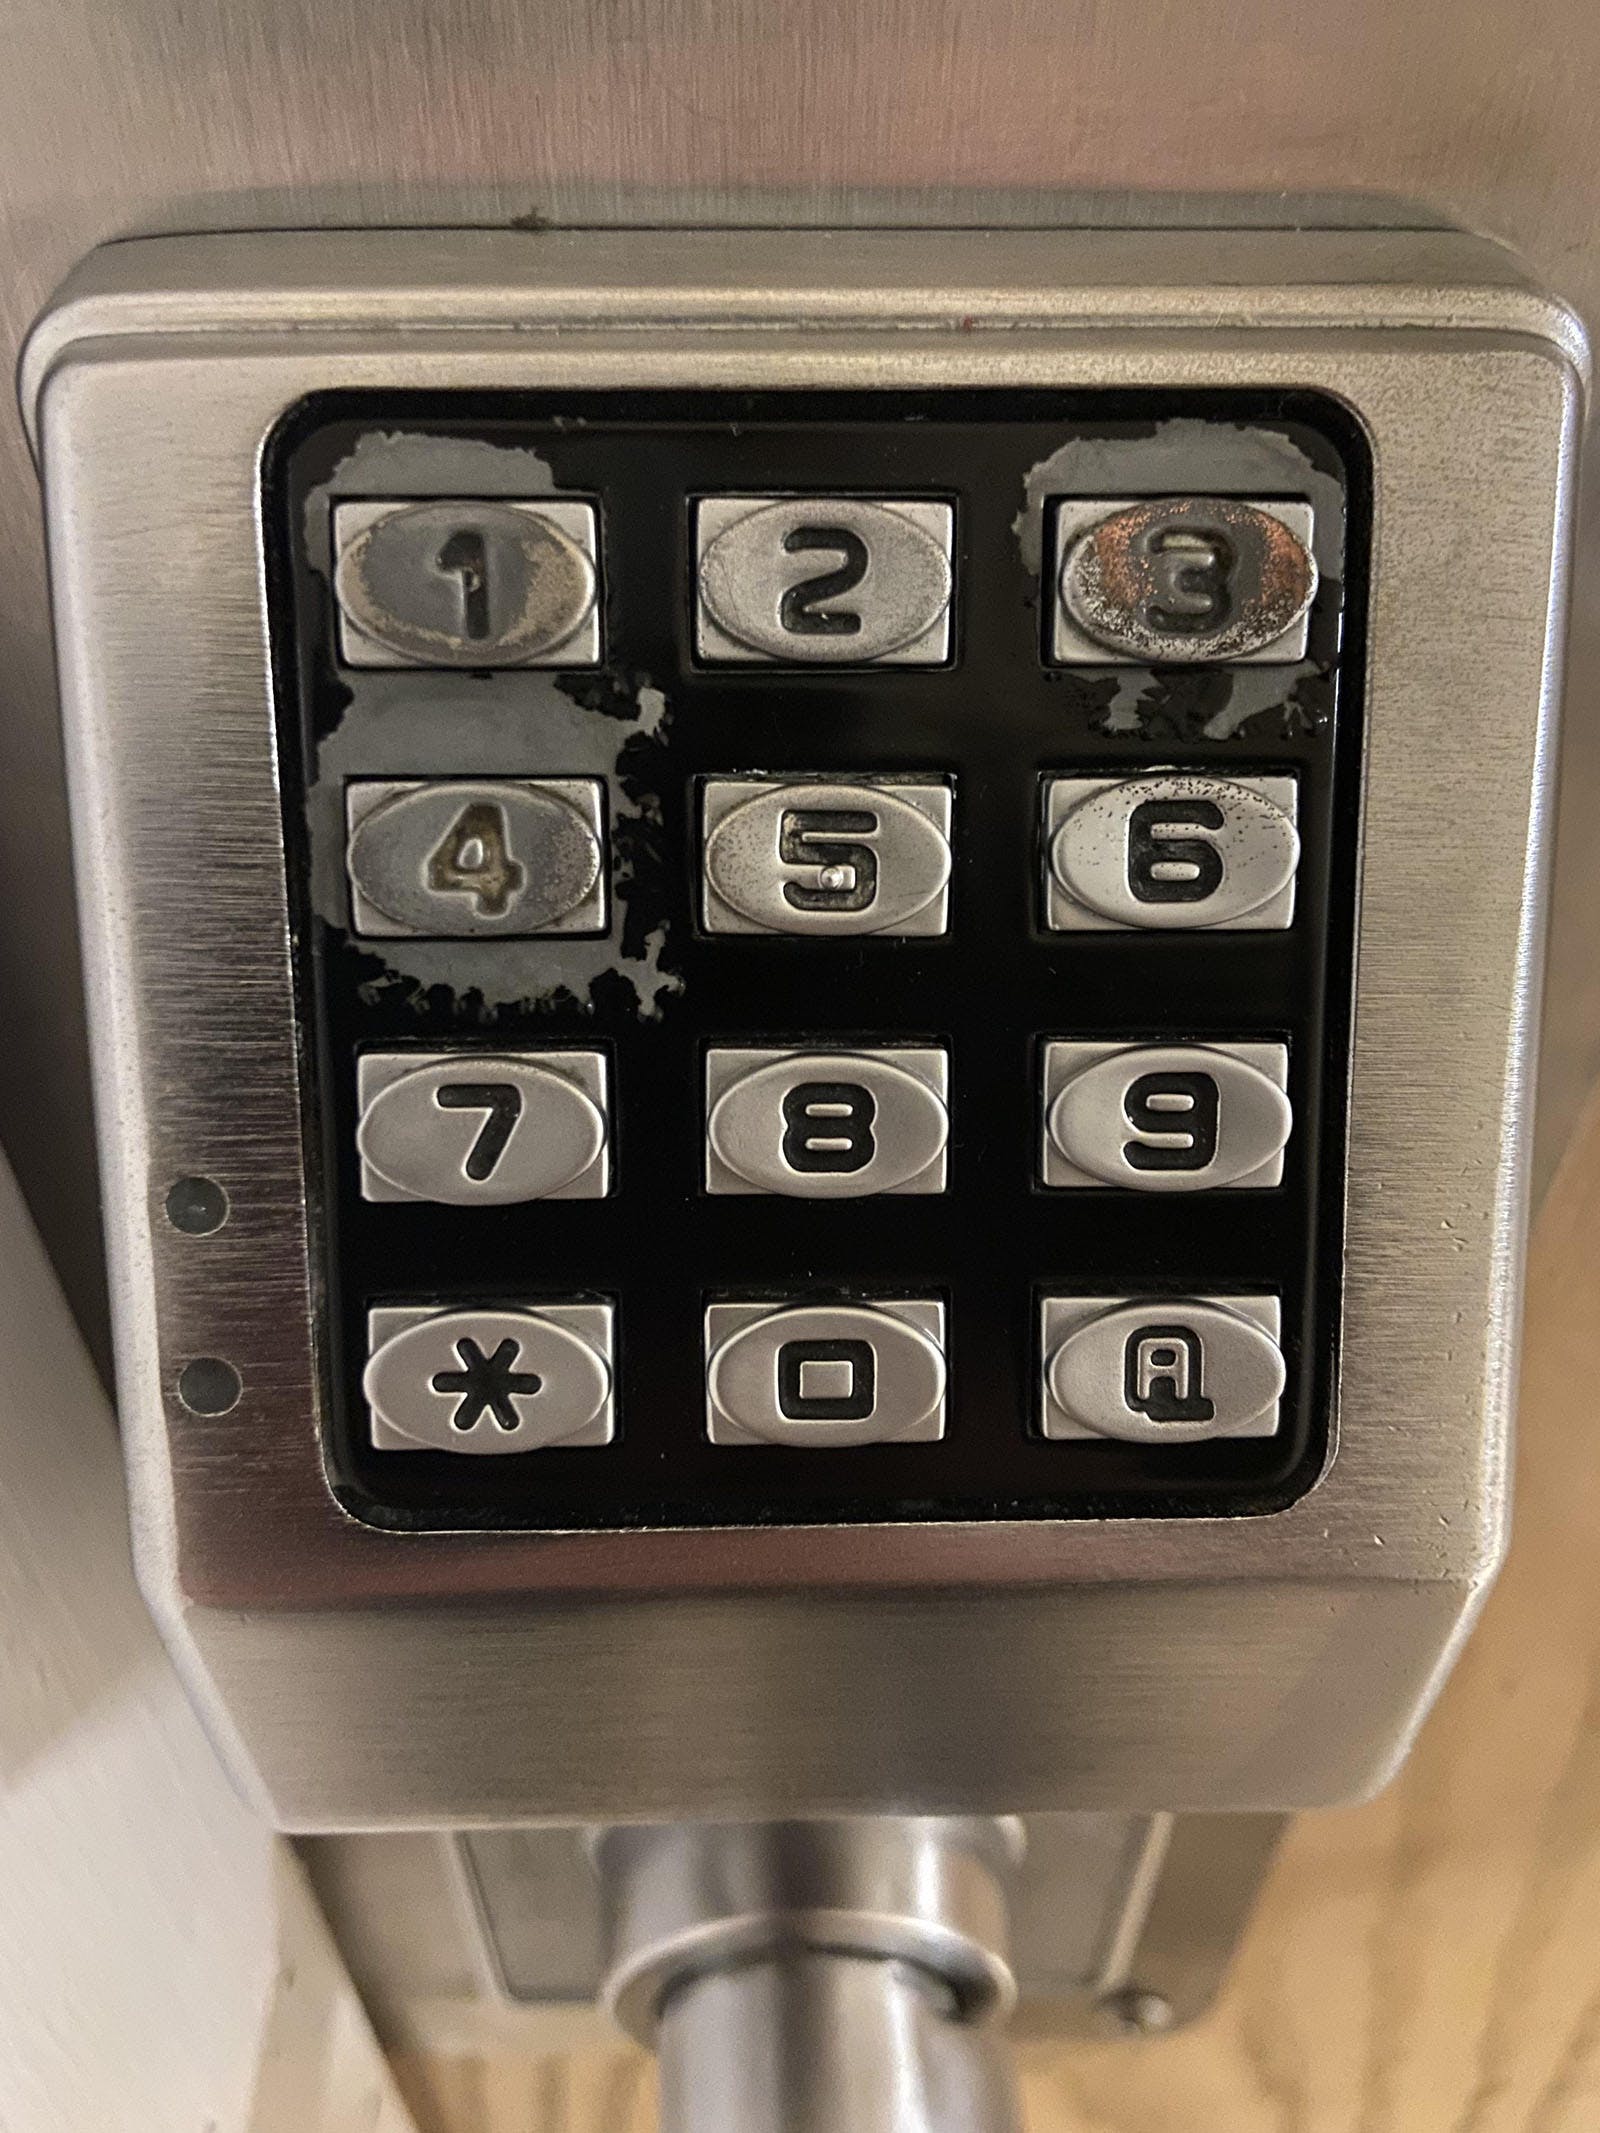 PIN pad used to enter a building